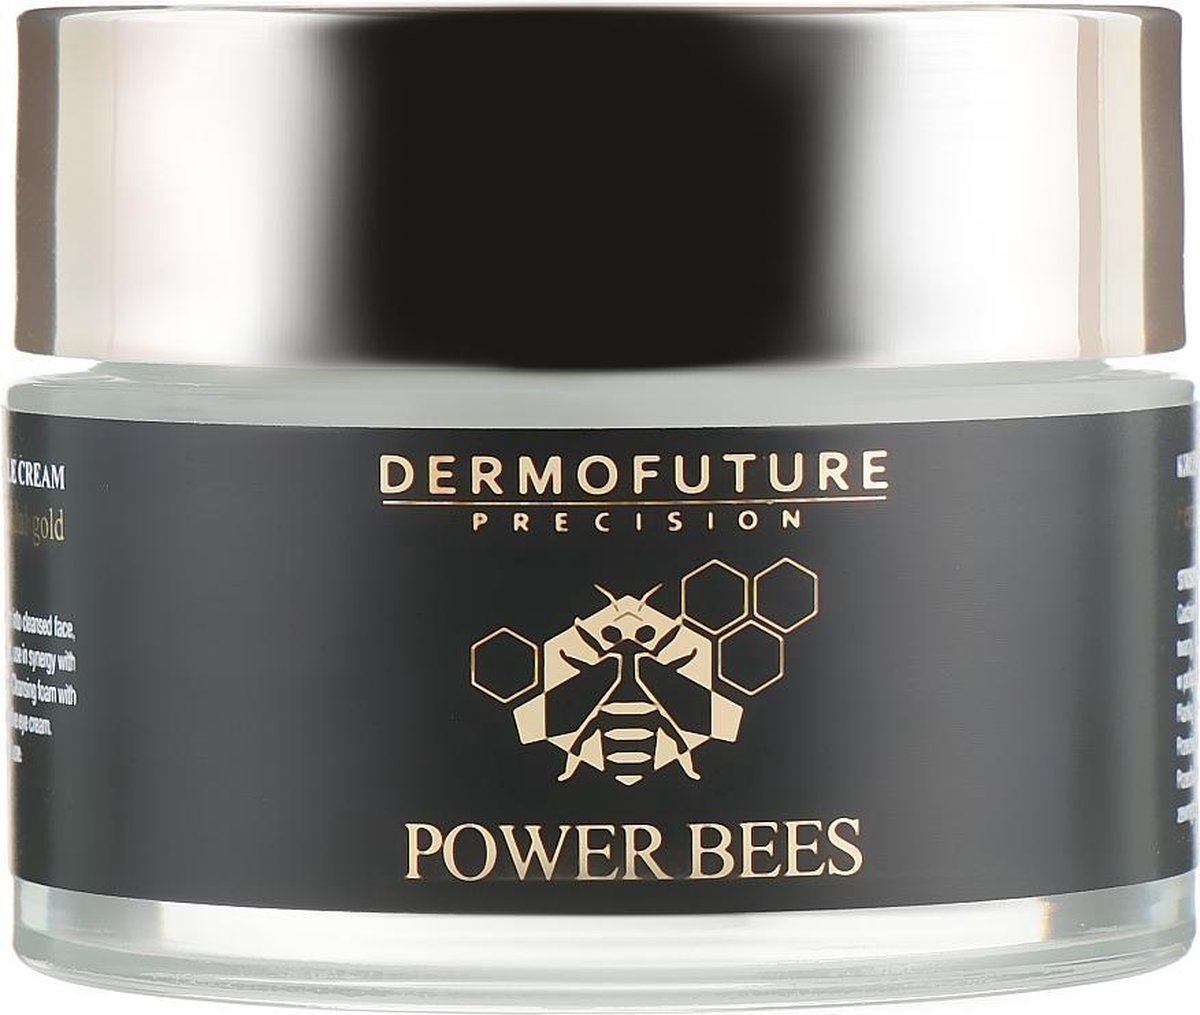 Dermofuture Power Bees Protective Anti-wrinkle Cream; Protects Against External Factors Such As Air Pollution, Sun, Low And High Temperatures.